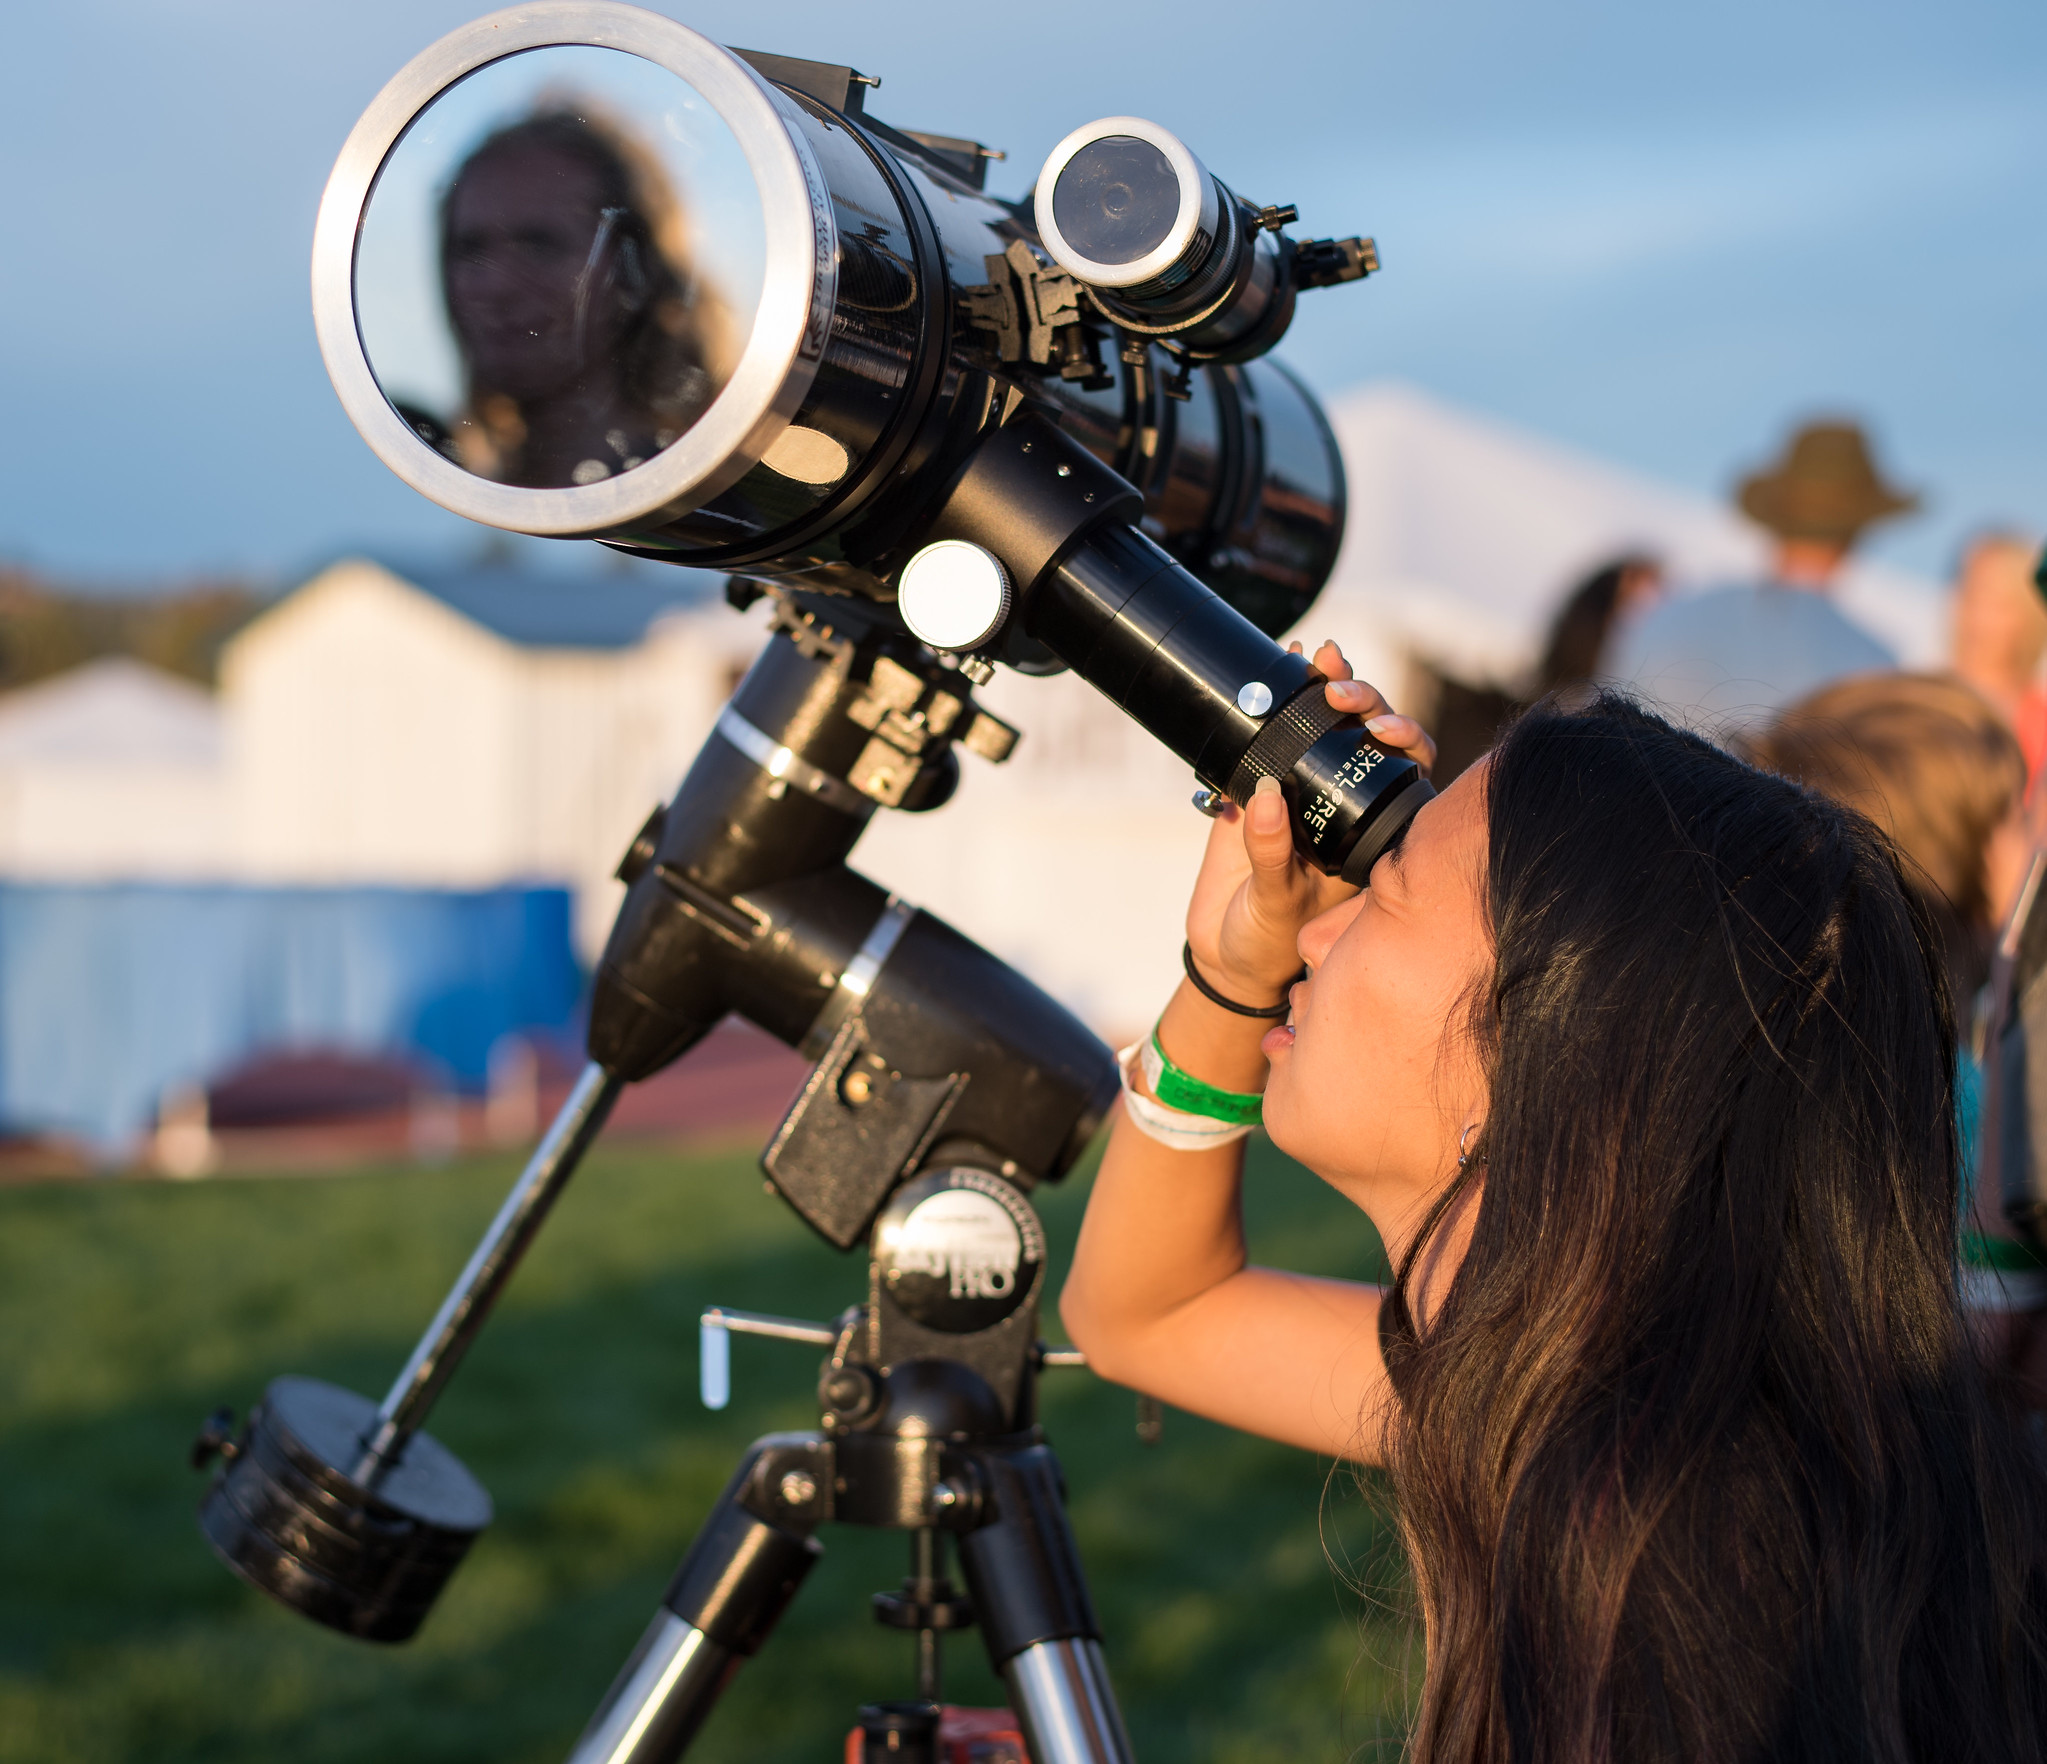 A person looks through a telescope. There is a large solar filter blocking the front of the telescope.